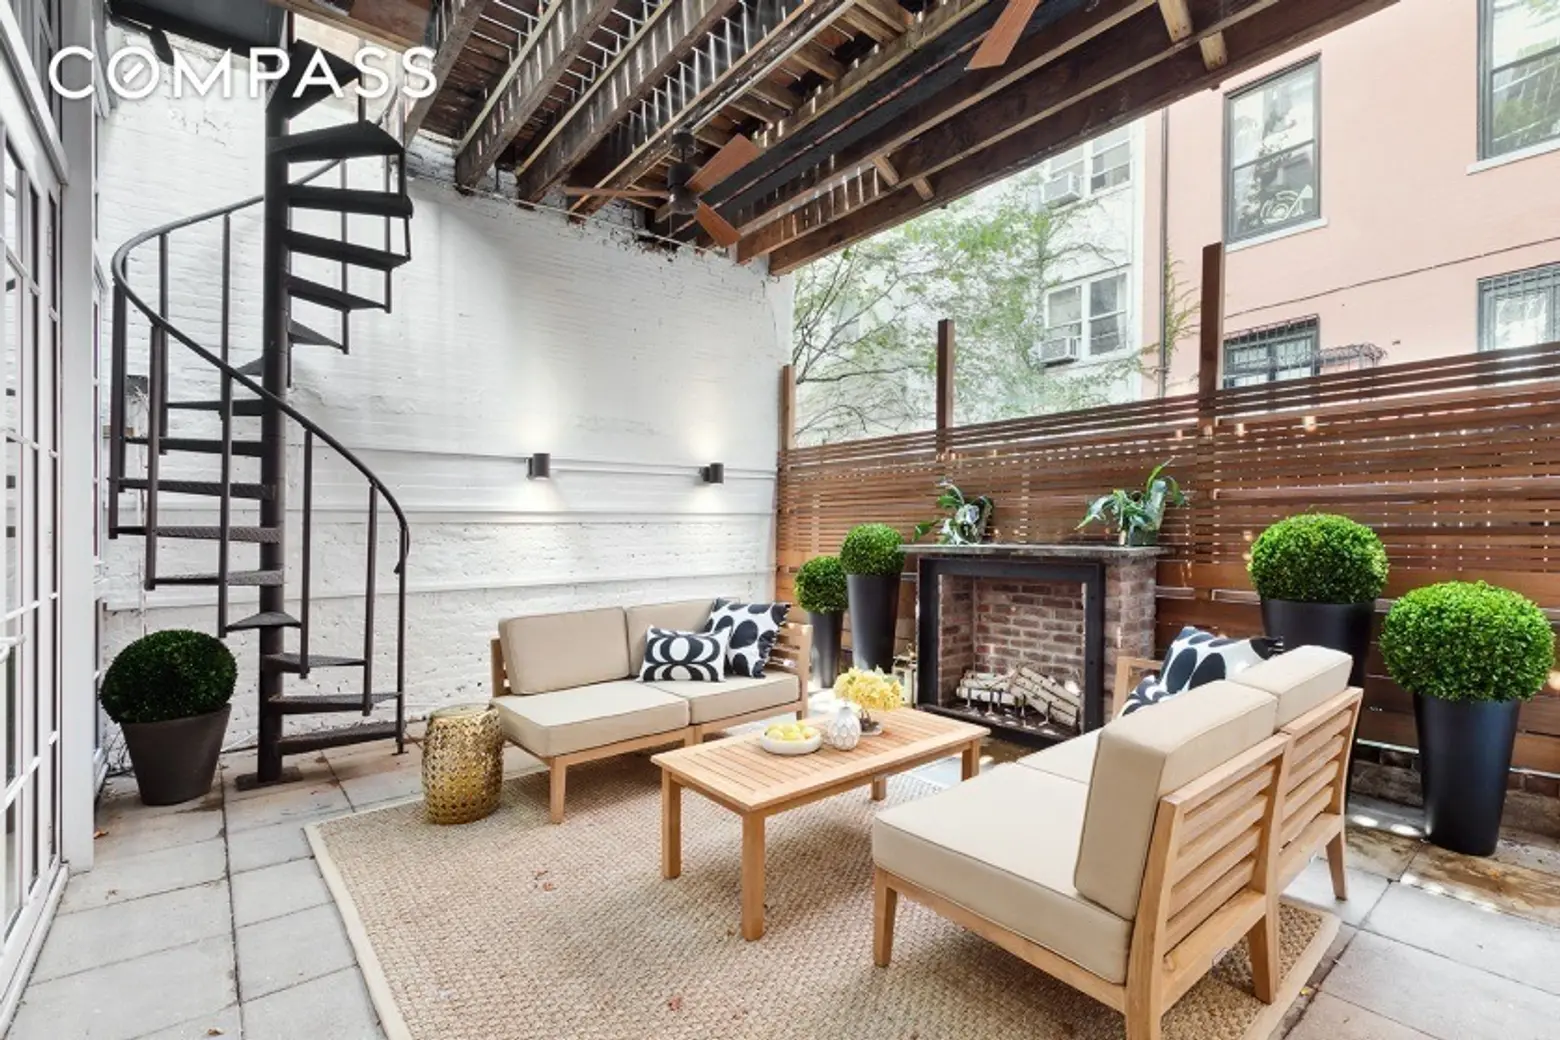 150 East 22nd Street, cool listing, carriage house, townhouse, gramercy, gramercy park, Breese Carriage House, E.L. Breese, historic homes, interiors, terrace, roof deck, outdoor space